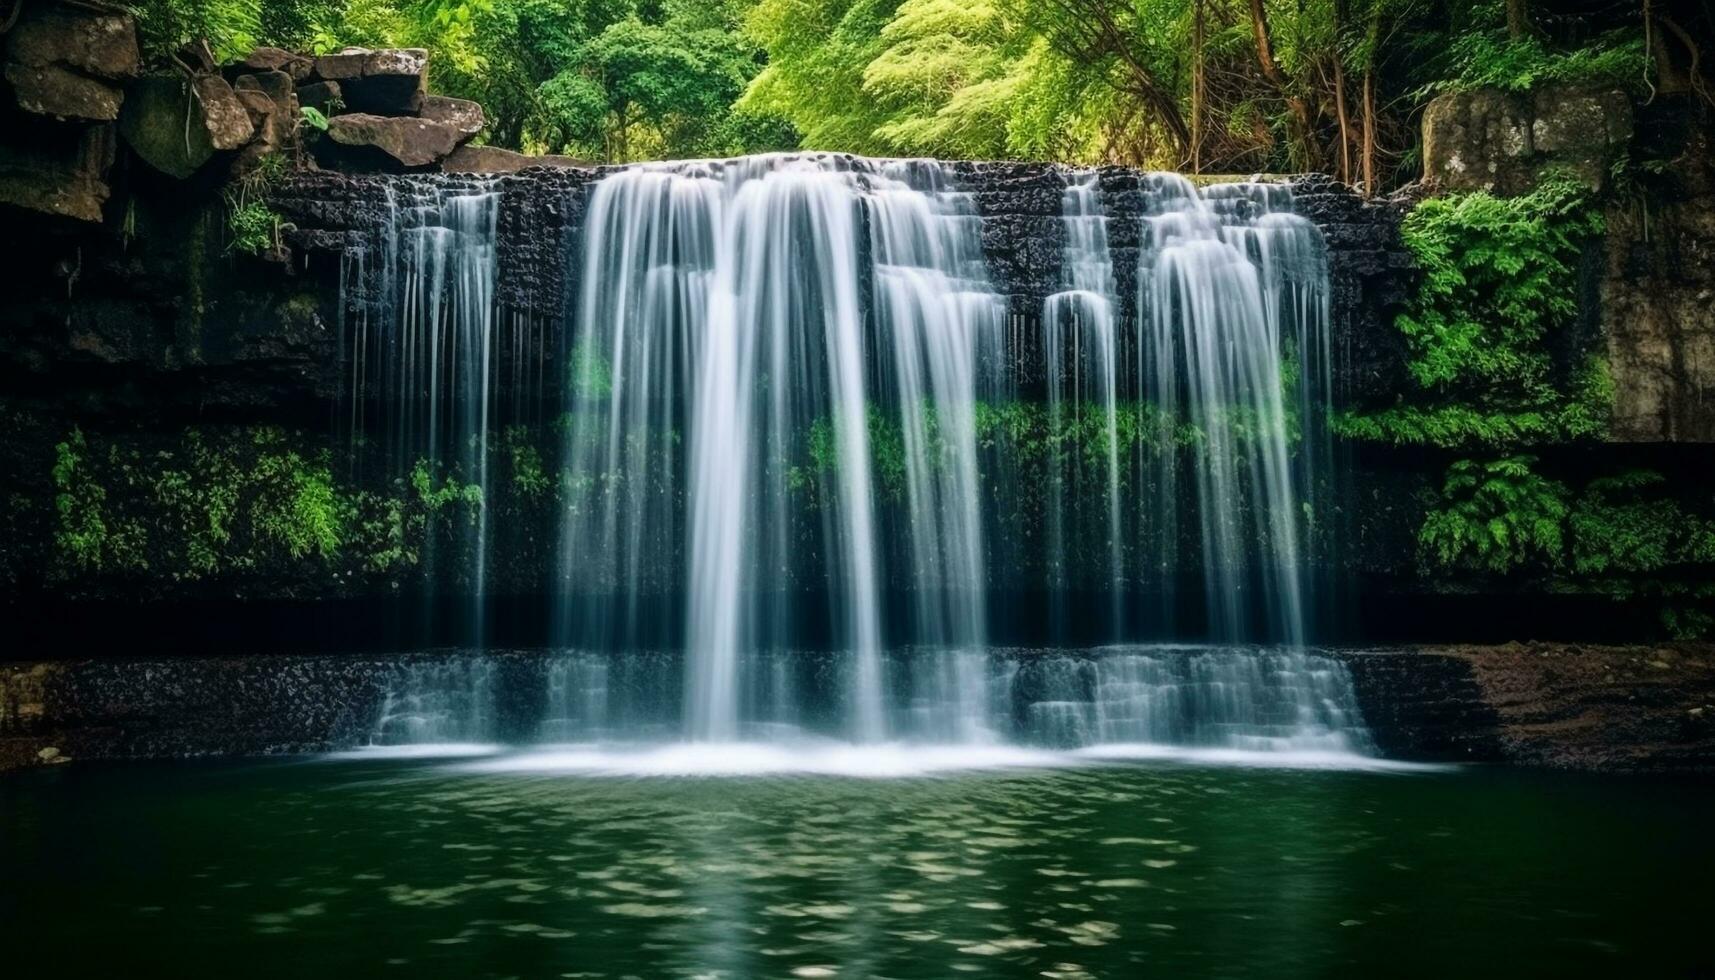 Nature beauty in motion flowing water, green leaves, and tranquil scenes generated by AI photo